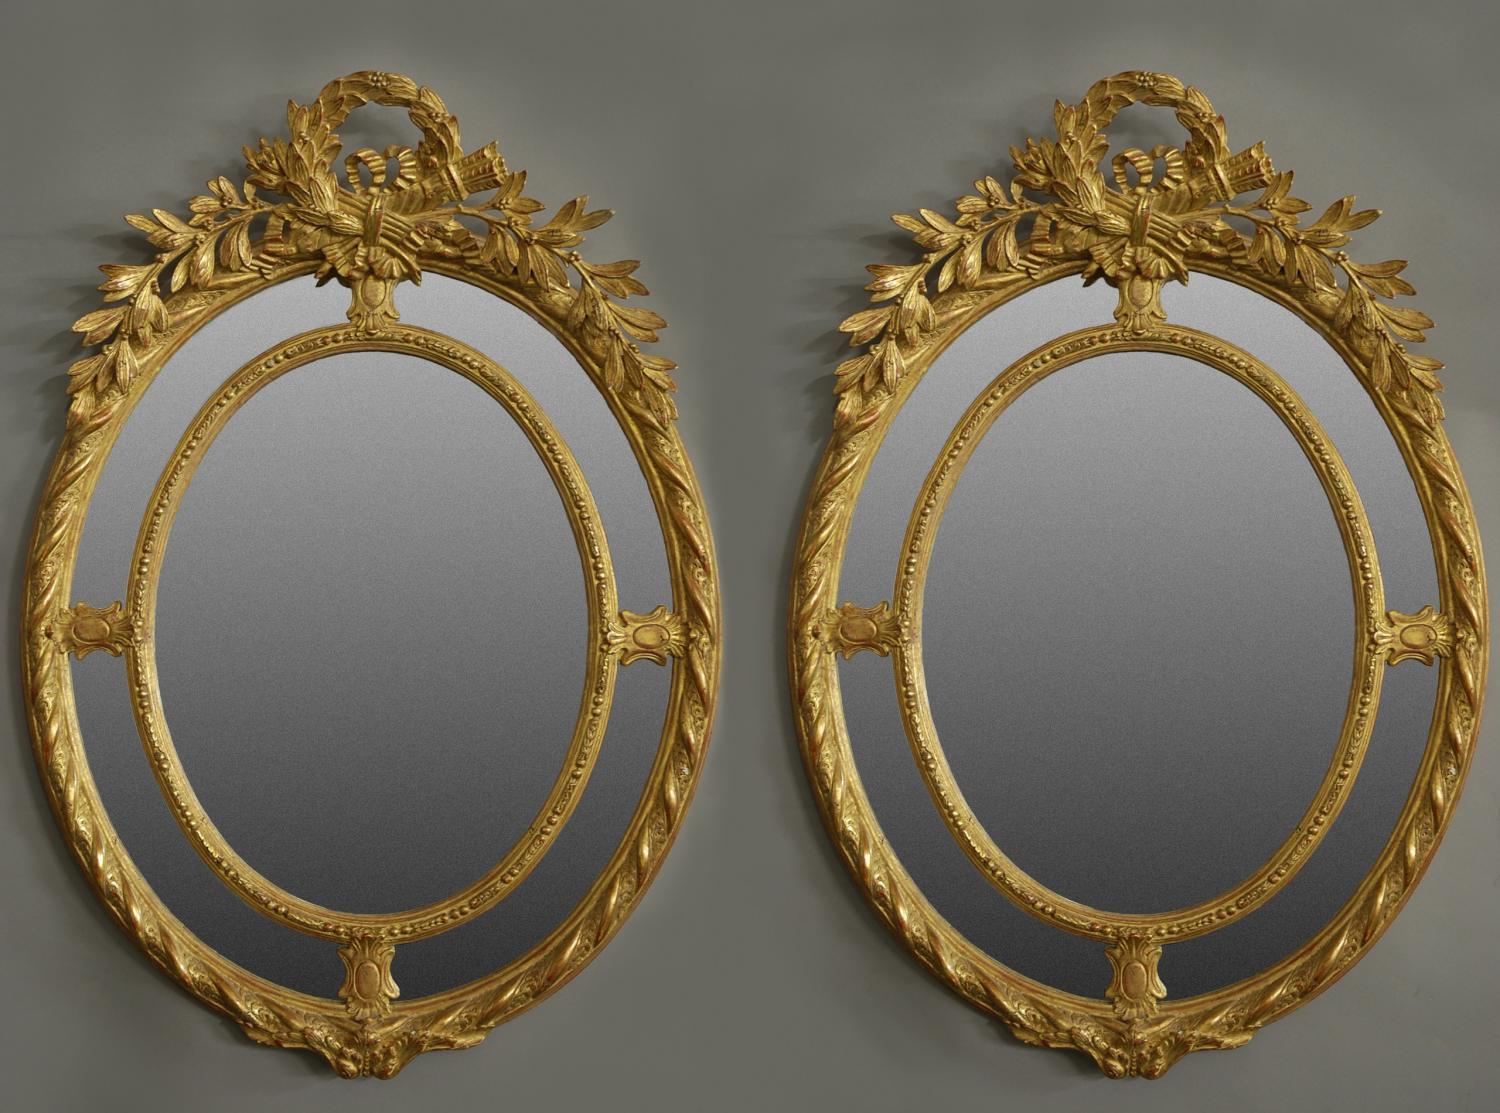 Pair of highly decorative oval gilt mirrors